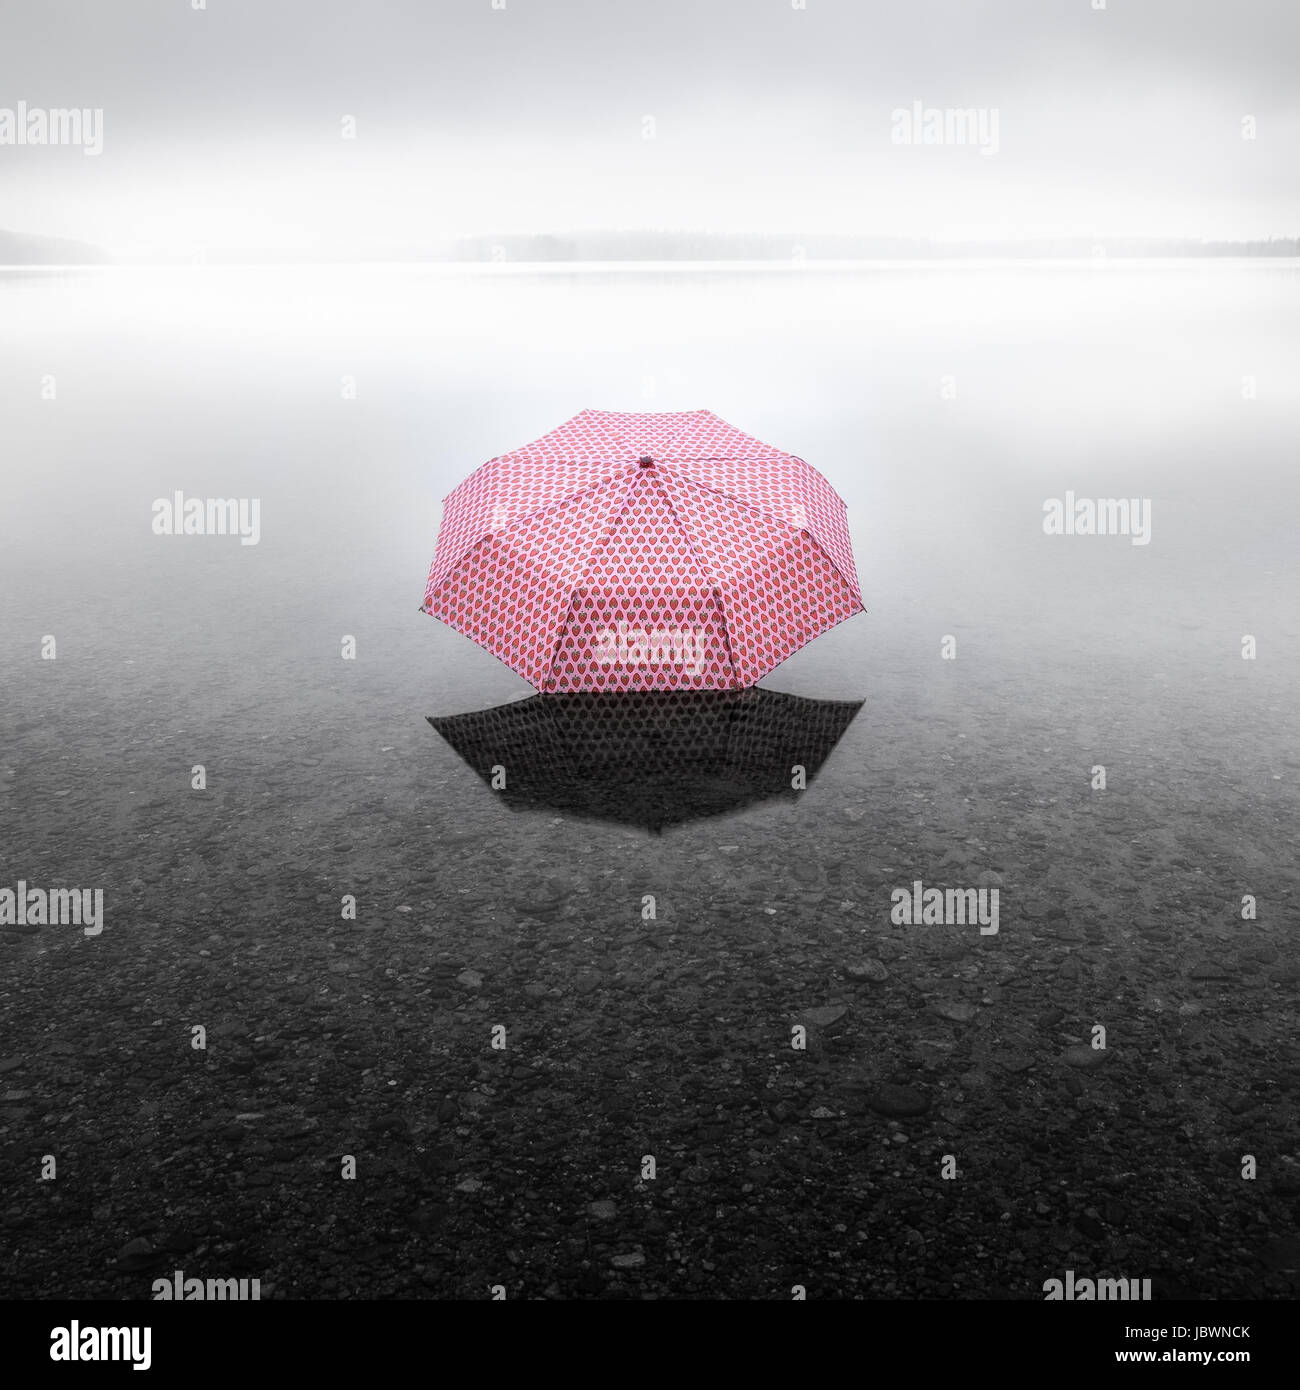 Pinky umbrella middle of the lake. This picture describes global warming. Stock Photo